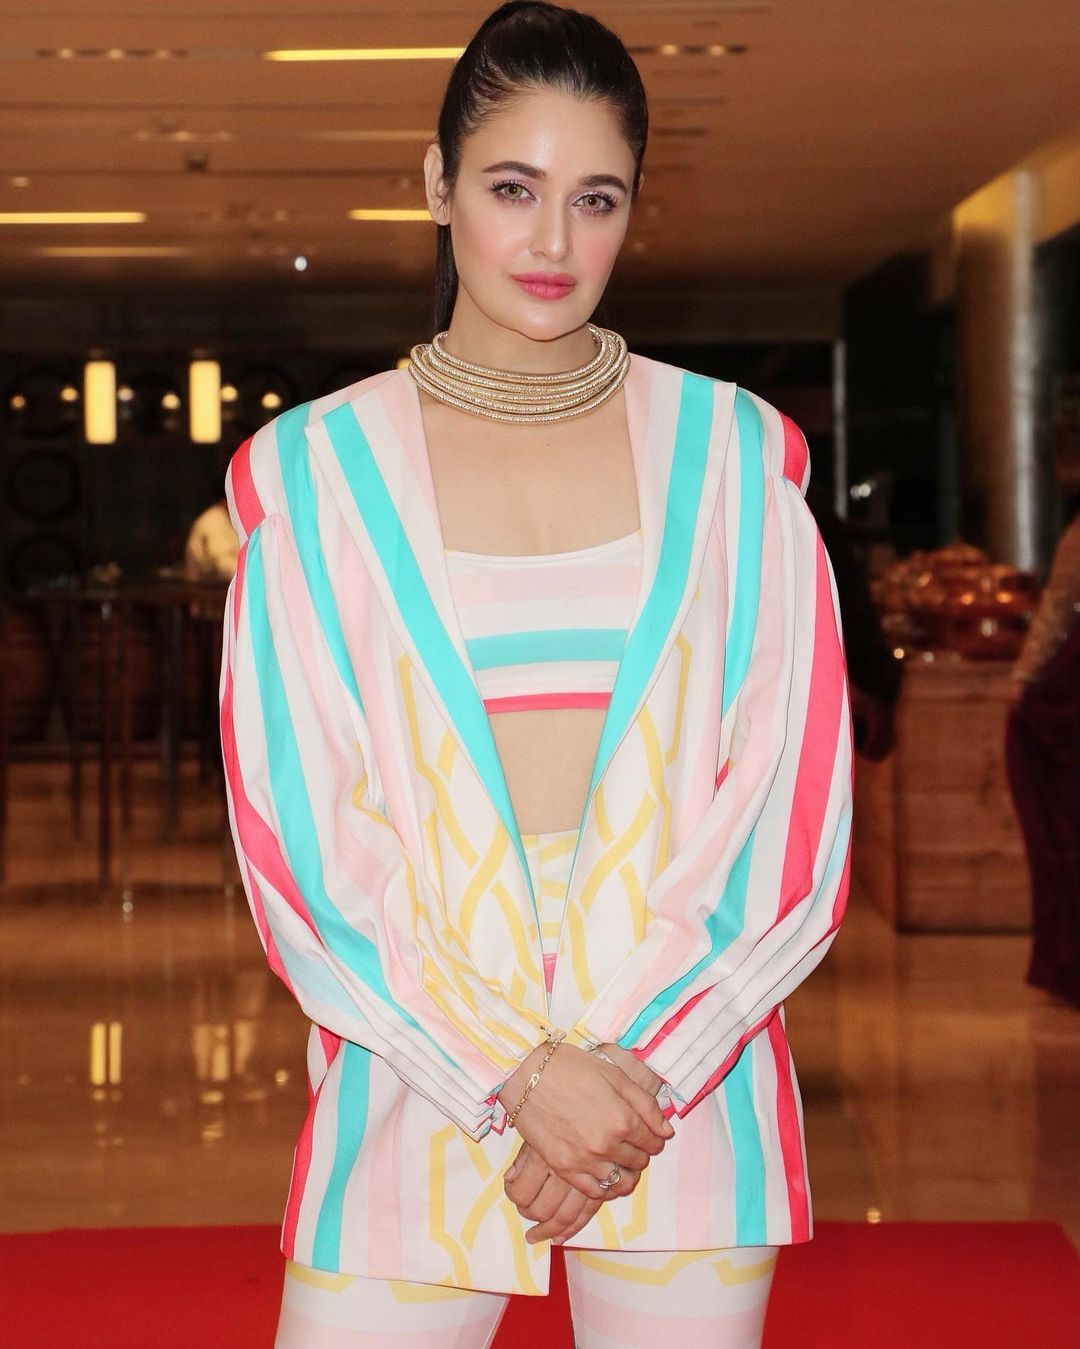 Netizens Demand Yuvika Chaudhary's Arrest For Using Casteist Slur In Home Video, Actress Says 'I Didn’t Know The Meaning'